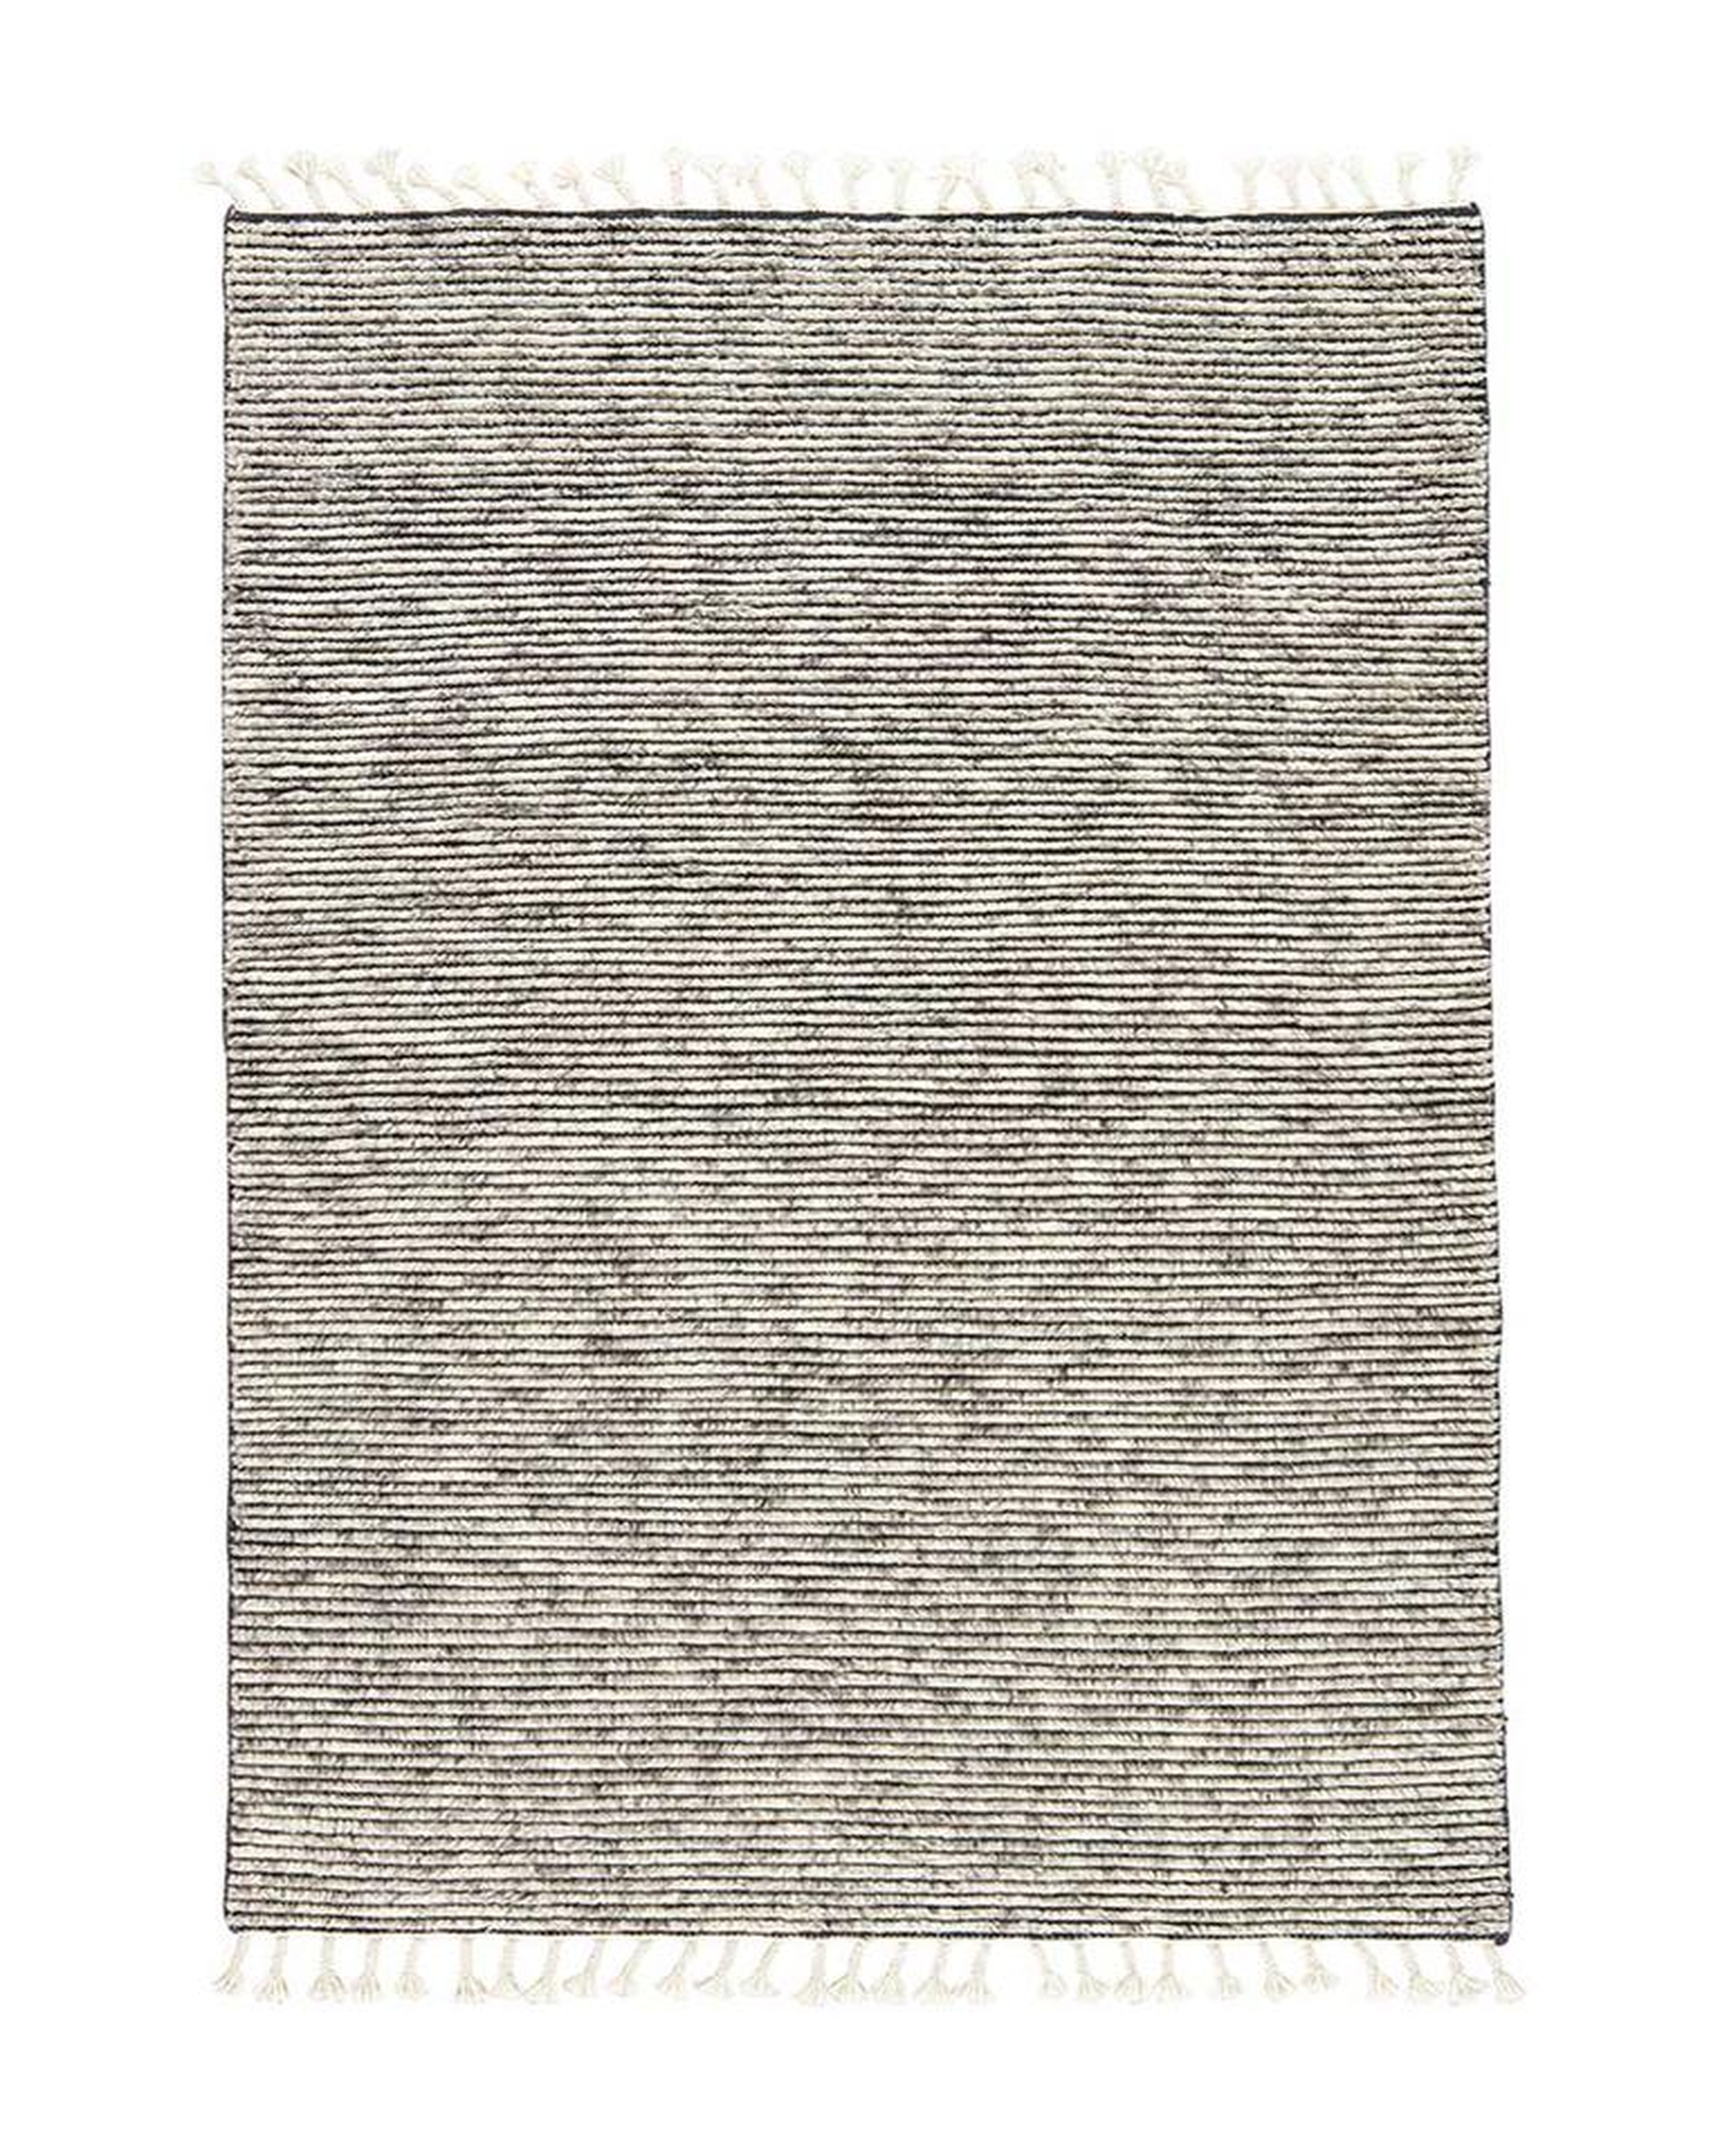 BUENOS AIRES HAND-KNOTTED WOOL RUG, 7'10" x 10'10" - McGee & Co.